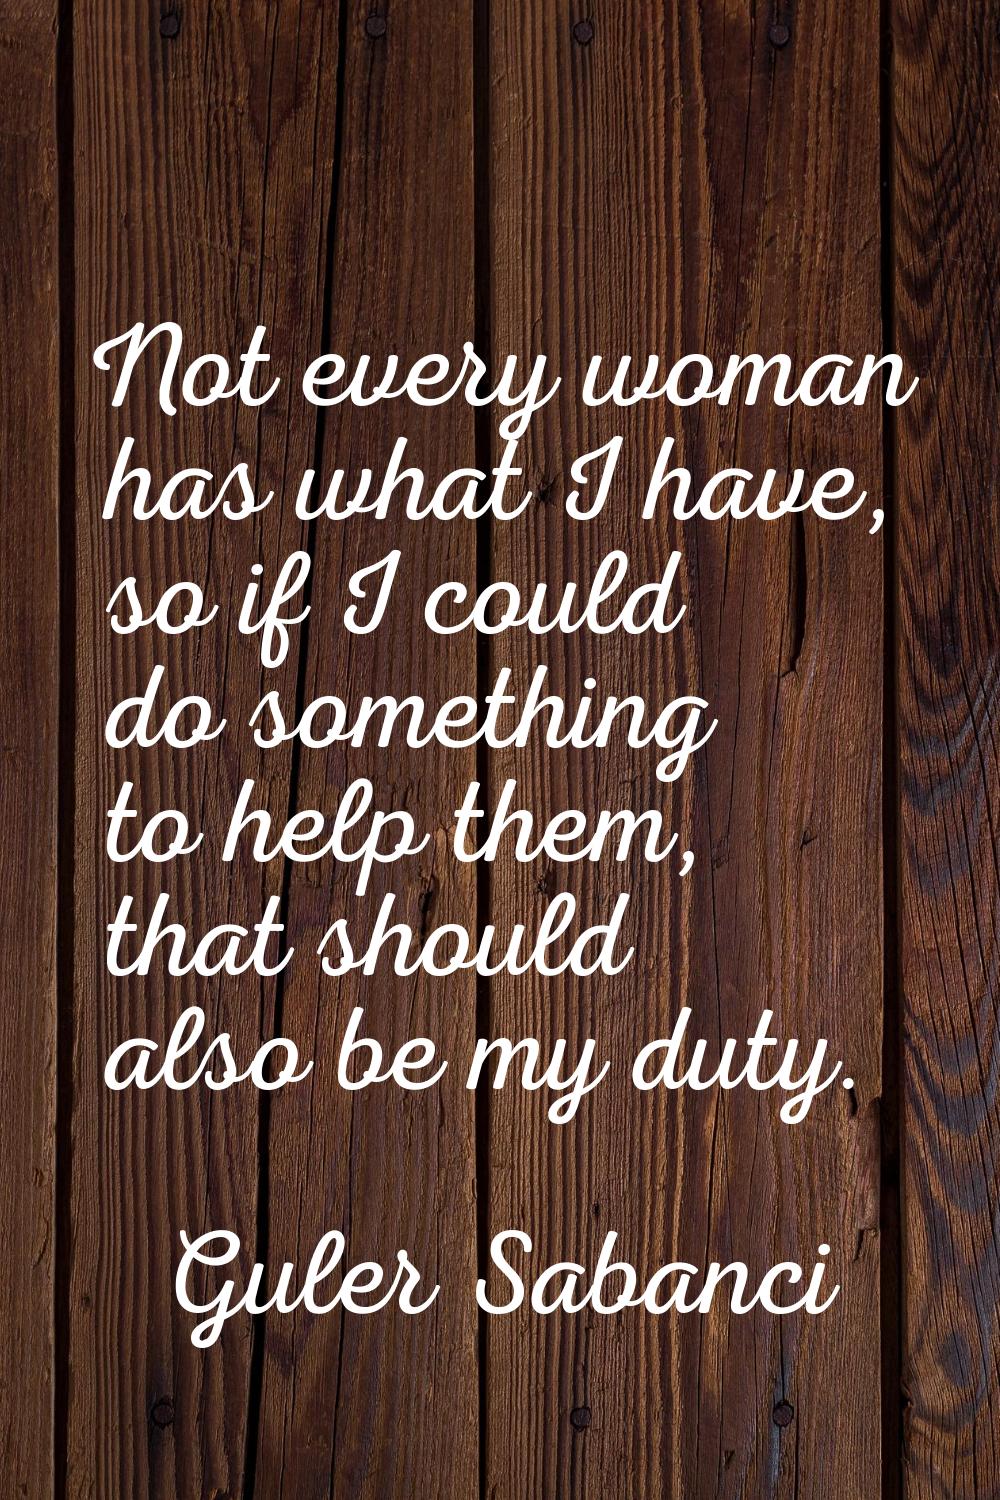 Not every woman has what I have, so if I could do something to help them, that should also be my du